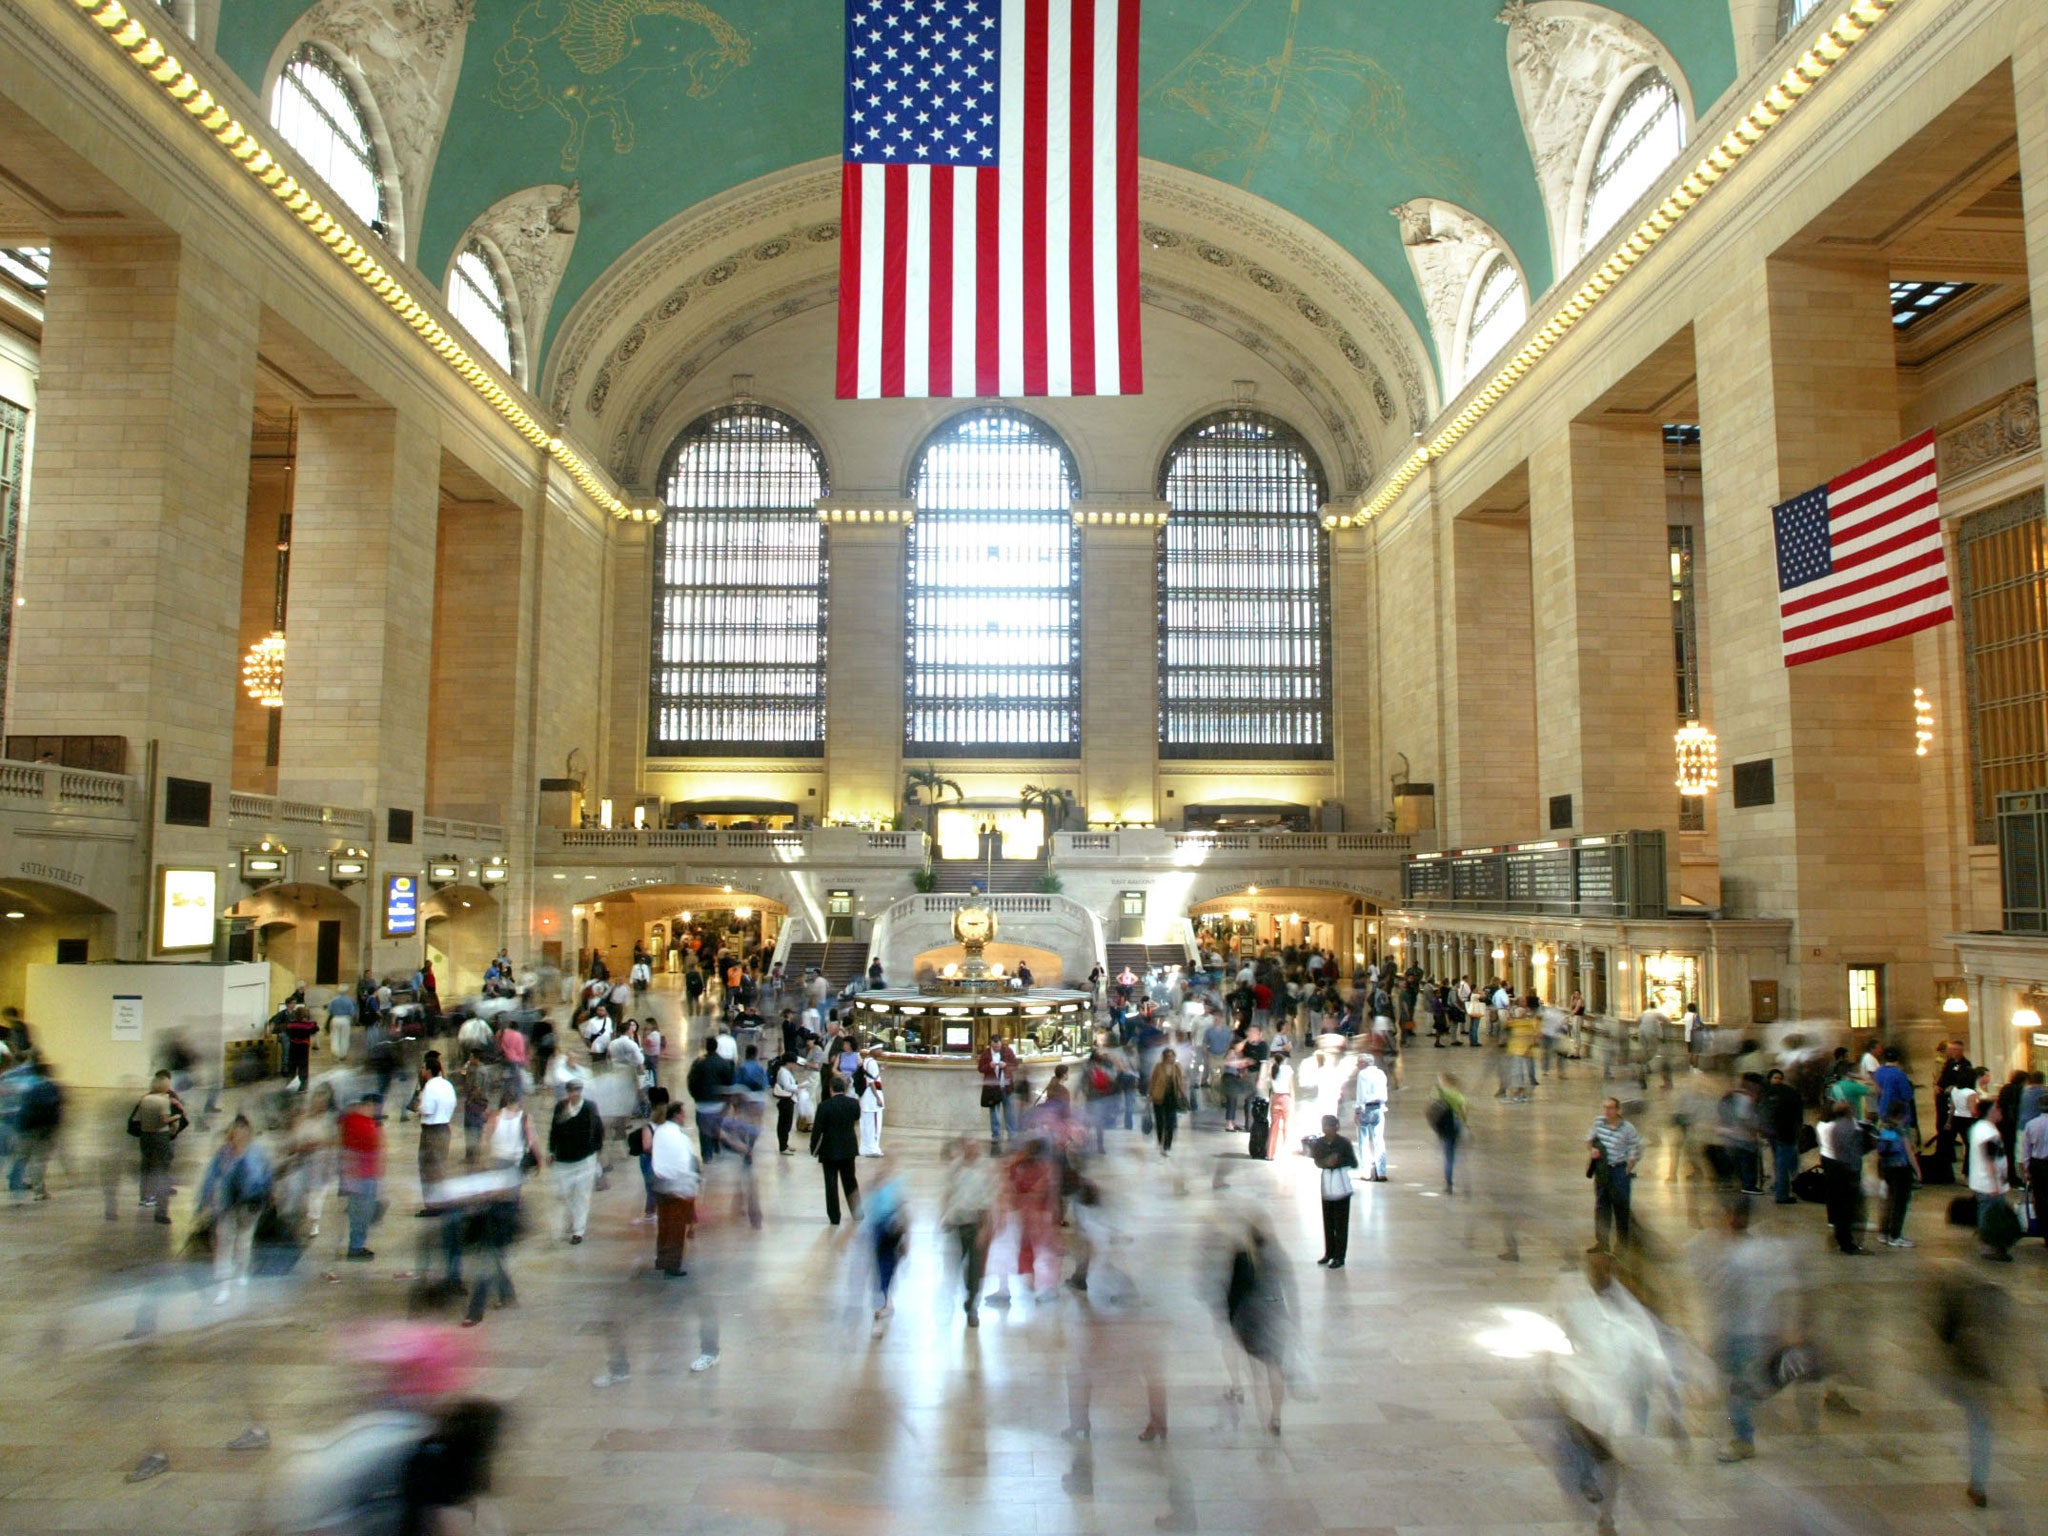 New York’s Grand Central Station, one of the country’s most impressive